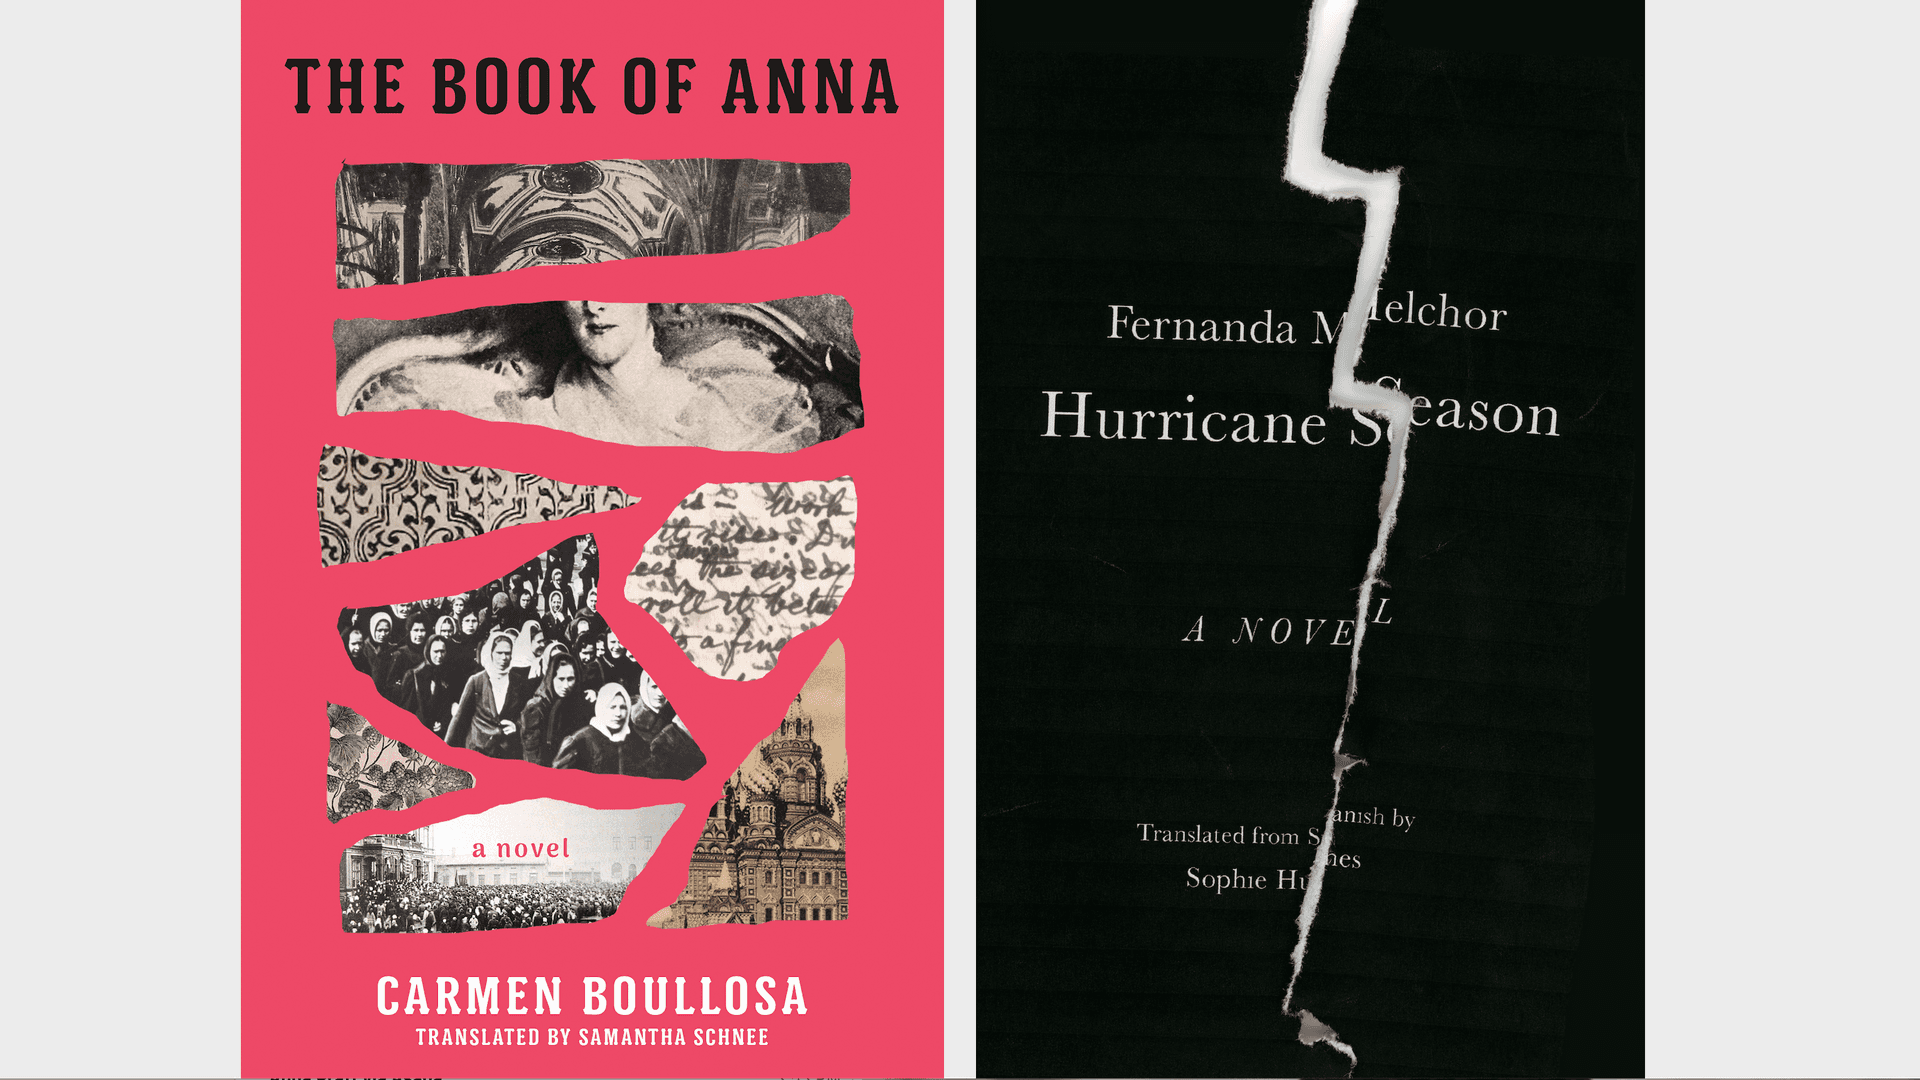 Two novels translated into English this spring show the broad landscape of Mexican literature today.